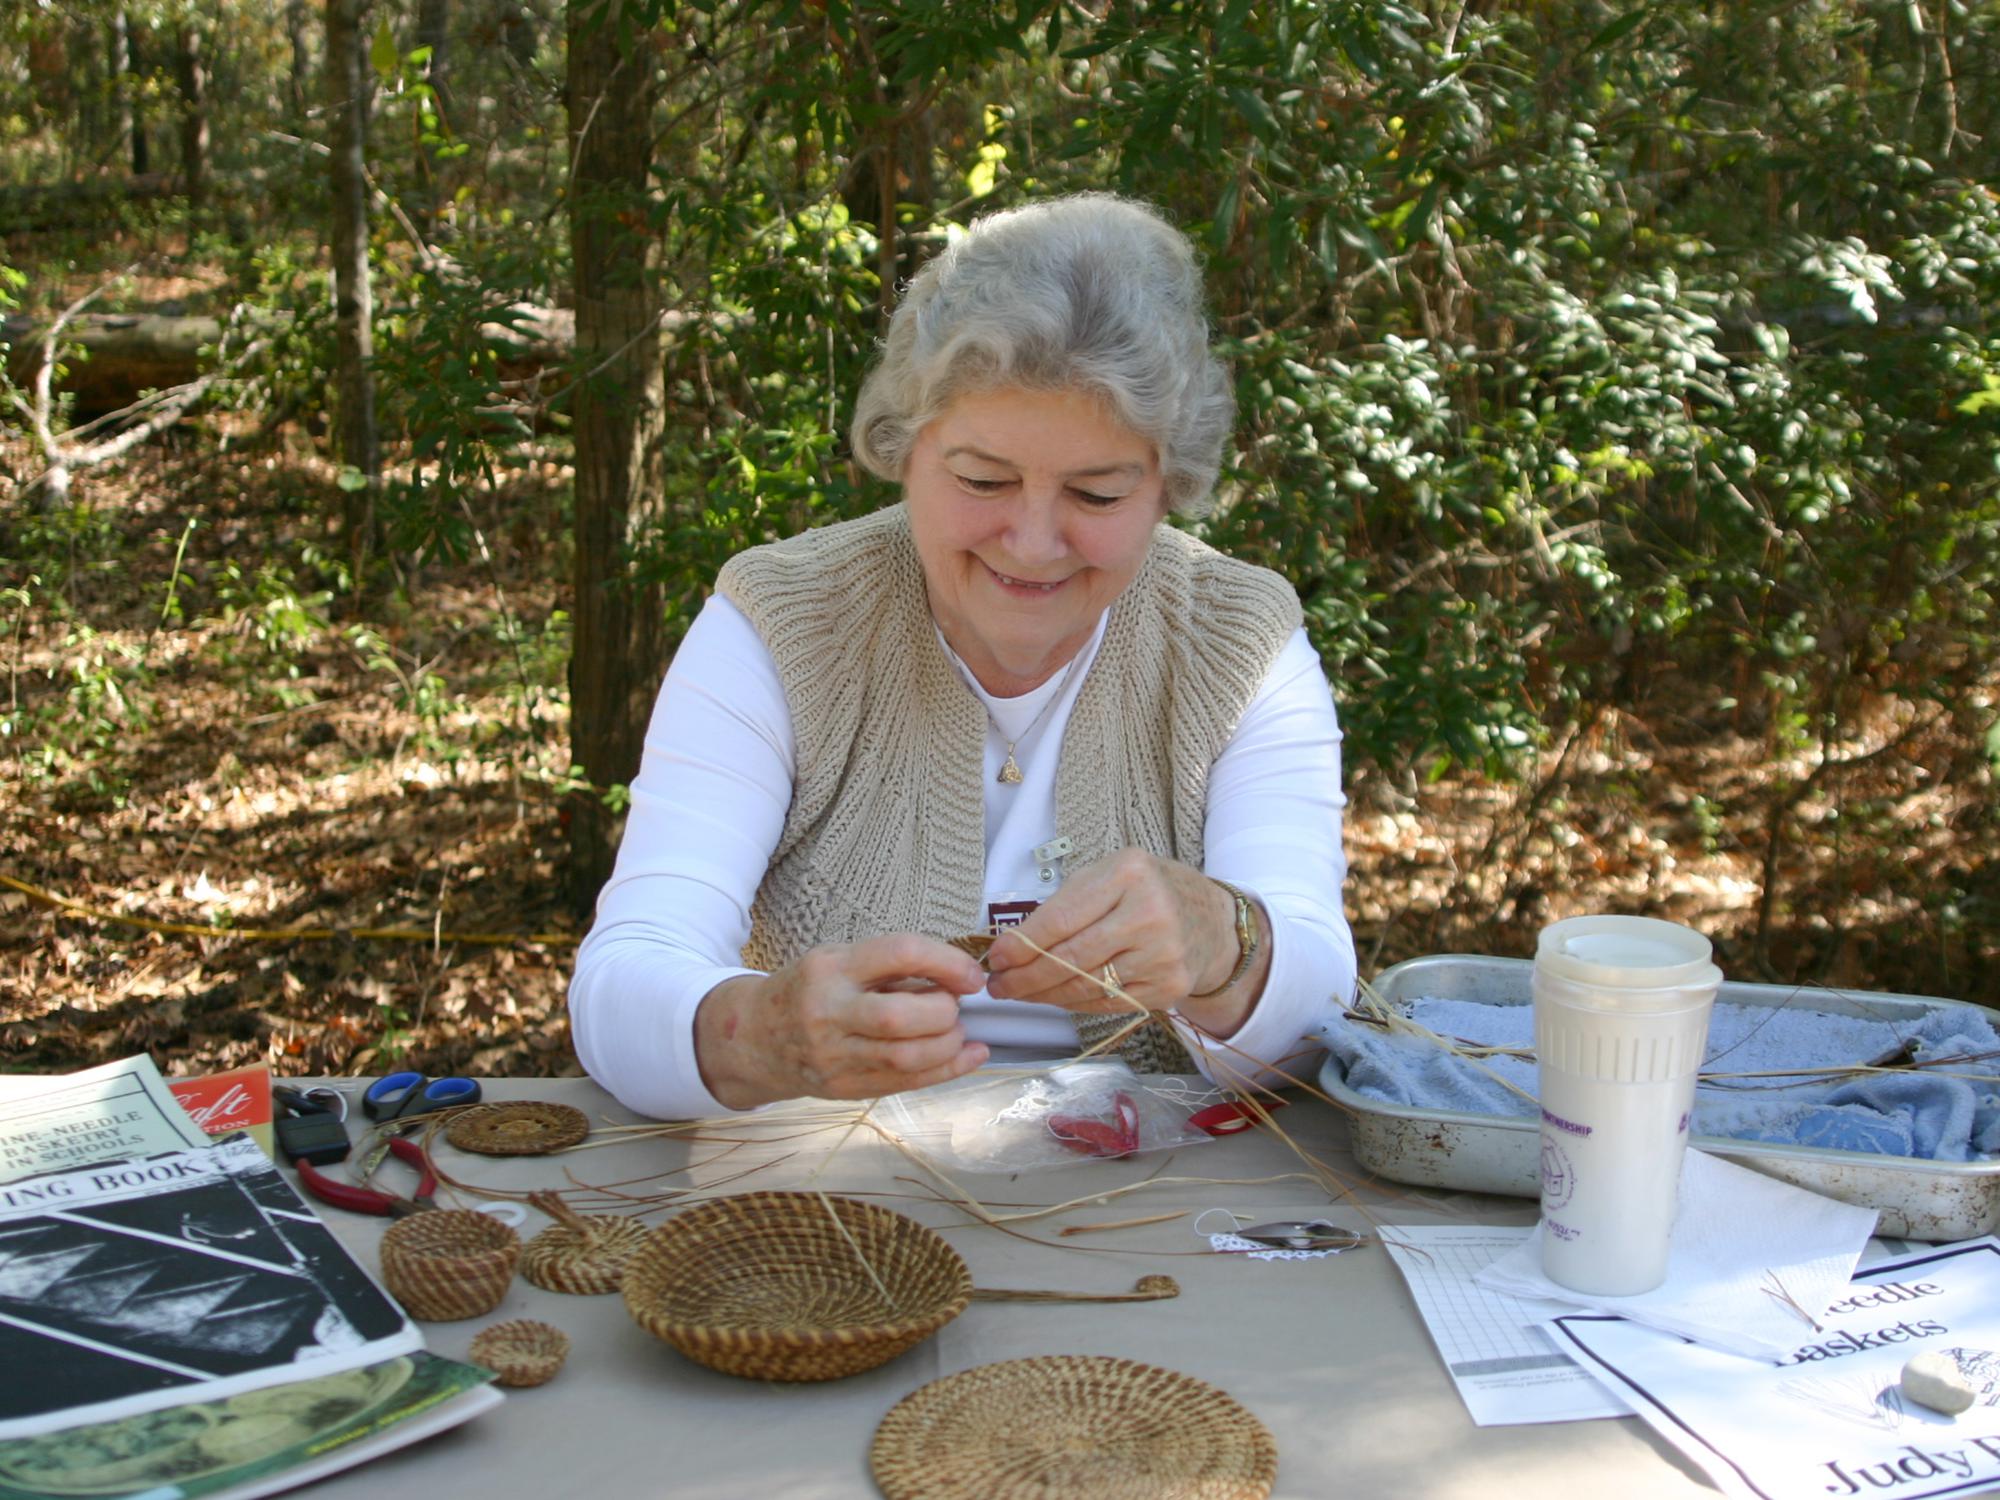 Judy Breland, Mississippi State University Extension Service agent in Stone County, demonstrates pine needle basket weaving at the 2015 Piney Woods Heritage Festival at the MSU Crosby Arboretum in Picayune, Mississippi. The 2016 festival is set for Nov. 18 and 19. (Photo by Mississippi State University Extension Service/Pat Drackett)